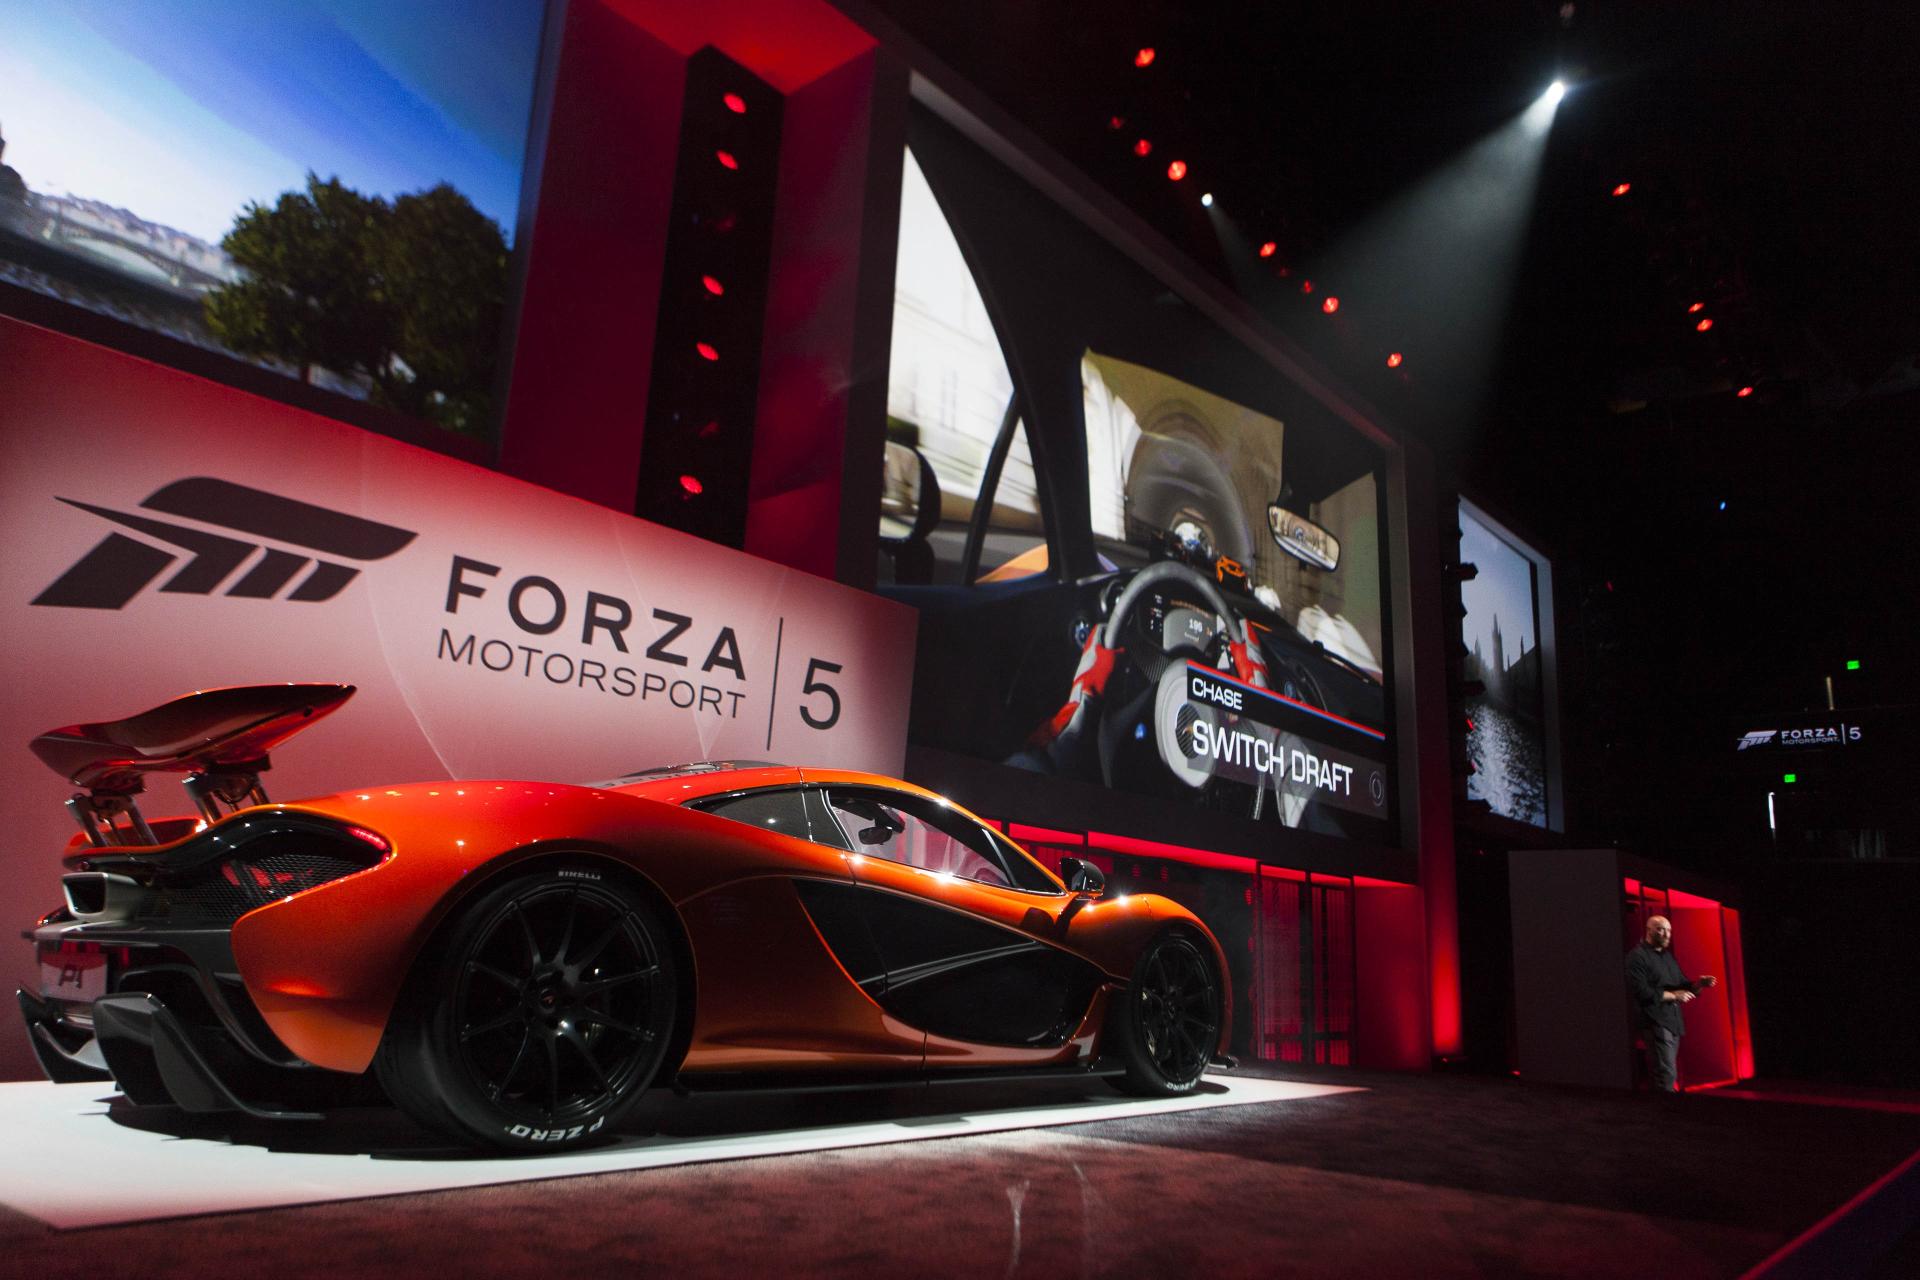 McLaren P1 ‘Ride of a Lifetime’ prize in new Forza 5 competition